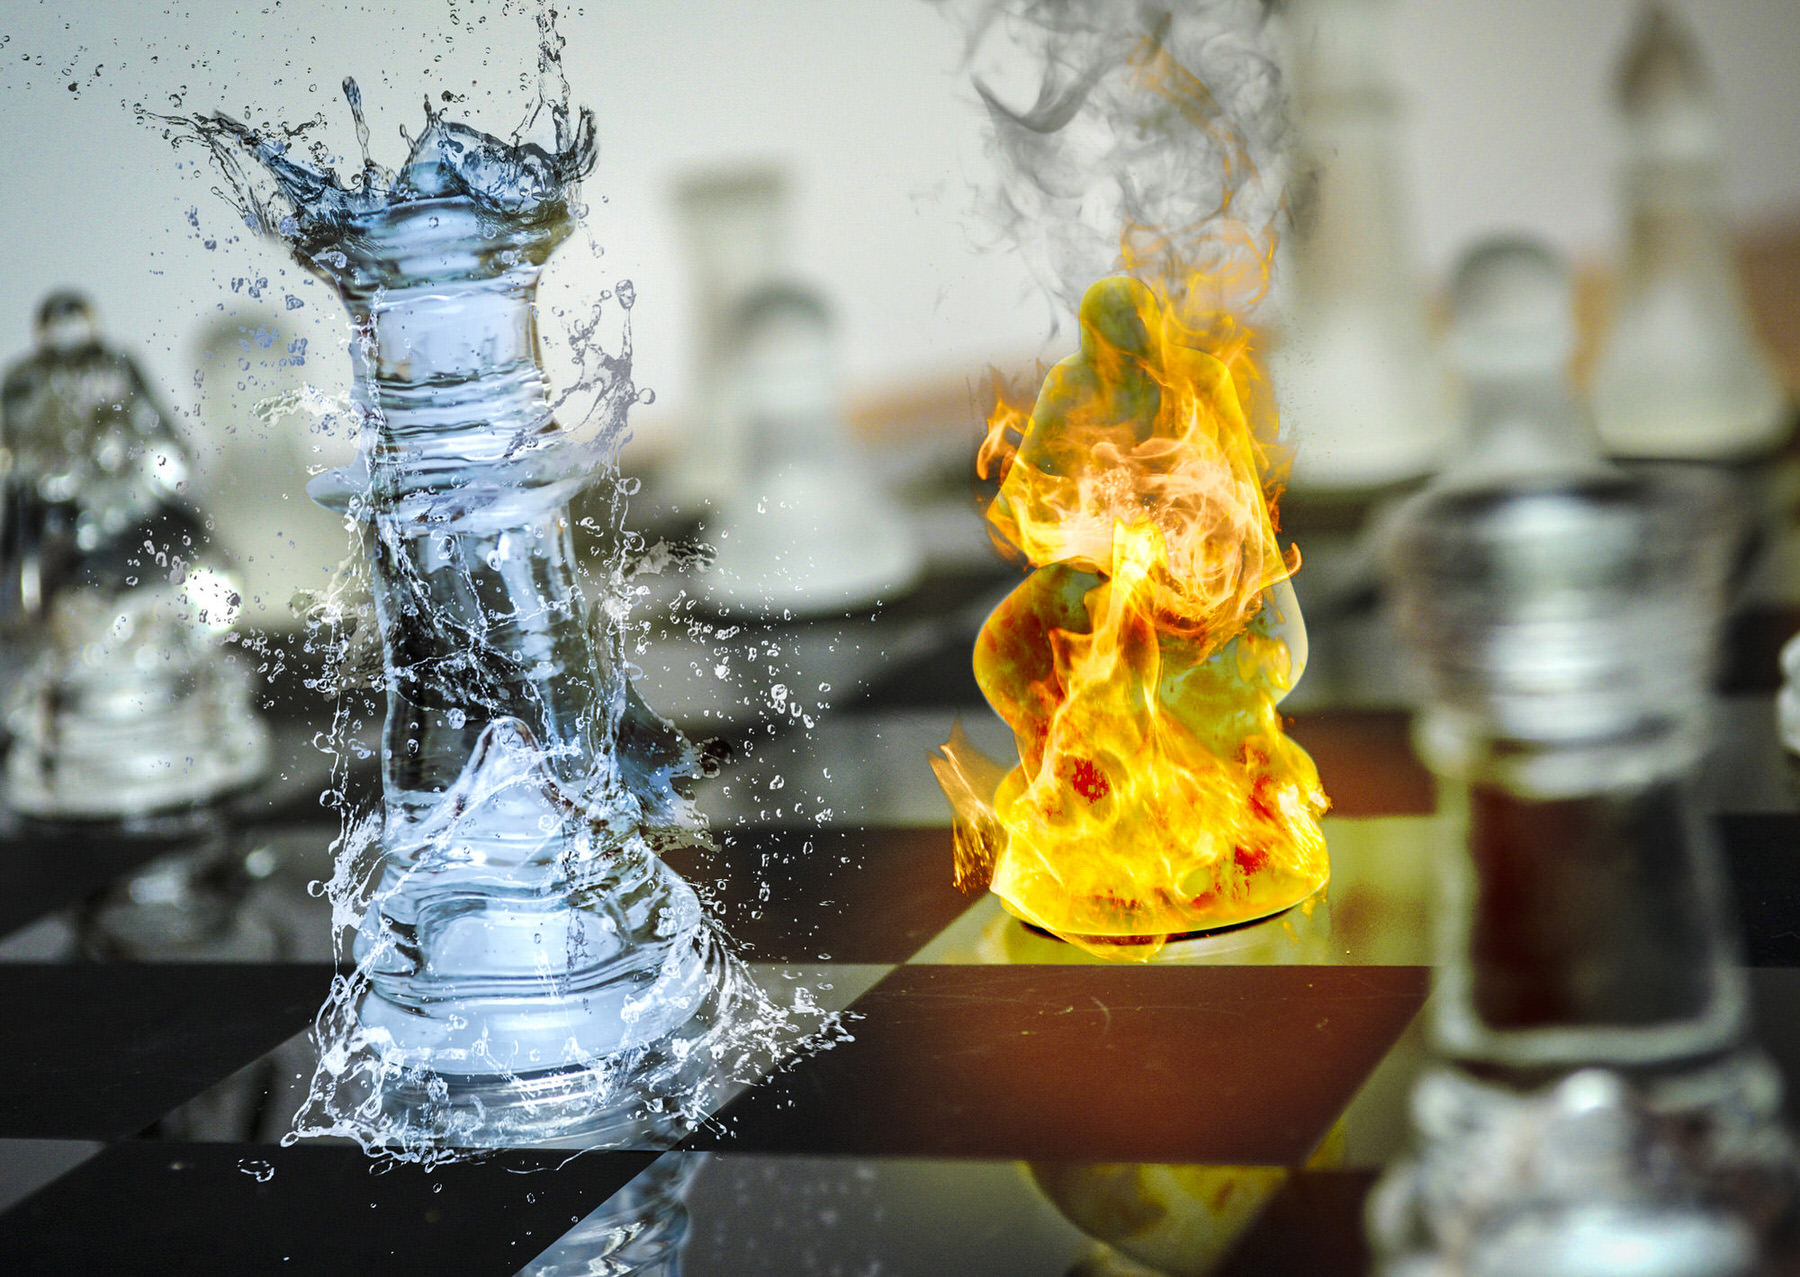 Chess Set Fire and Water Effects